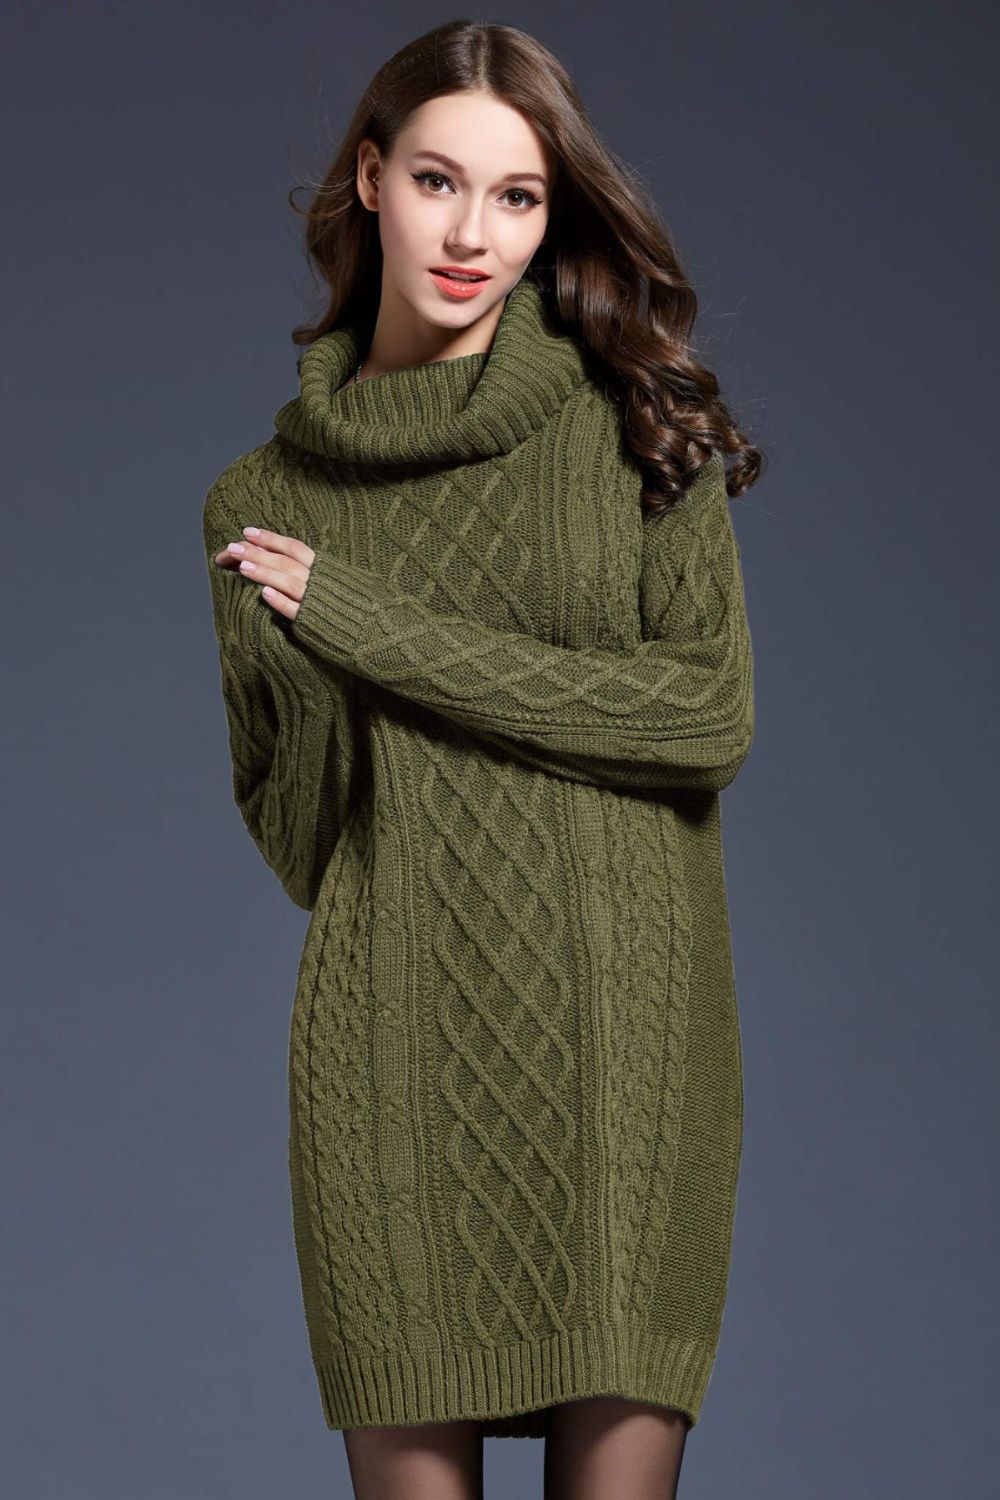 Woven Right Full Size Mixed Knit Cowl Neck Dropped Shoulder Sweater Dress - TiffanyzKlozet